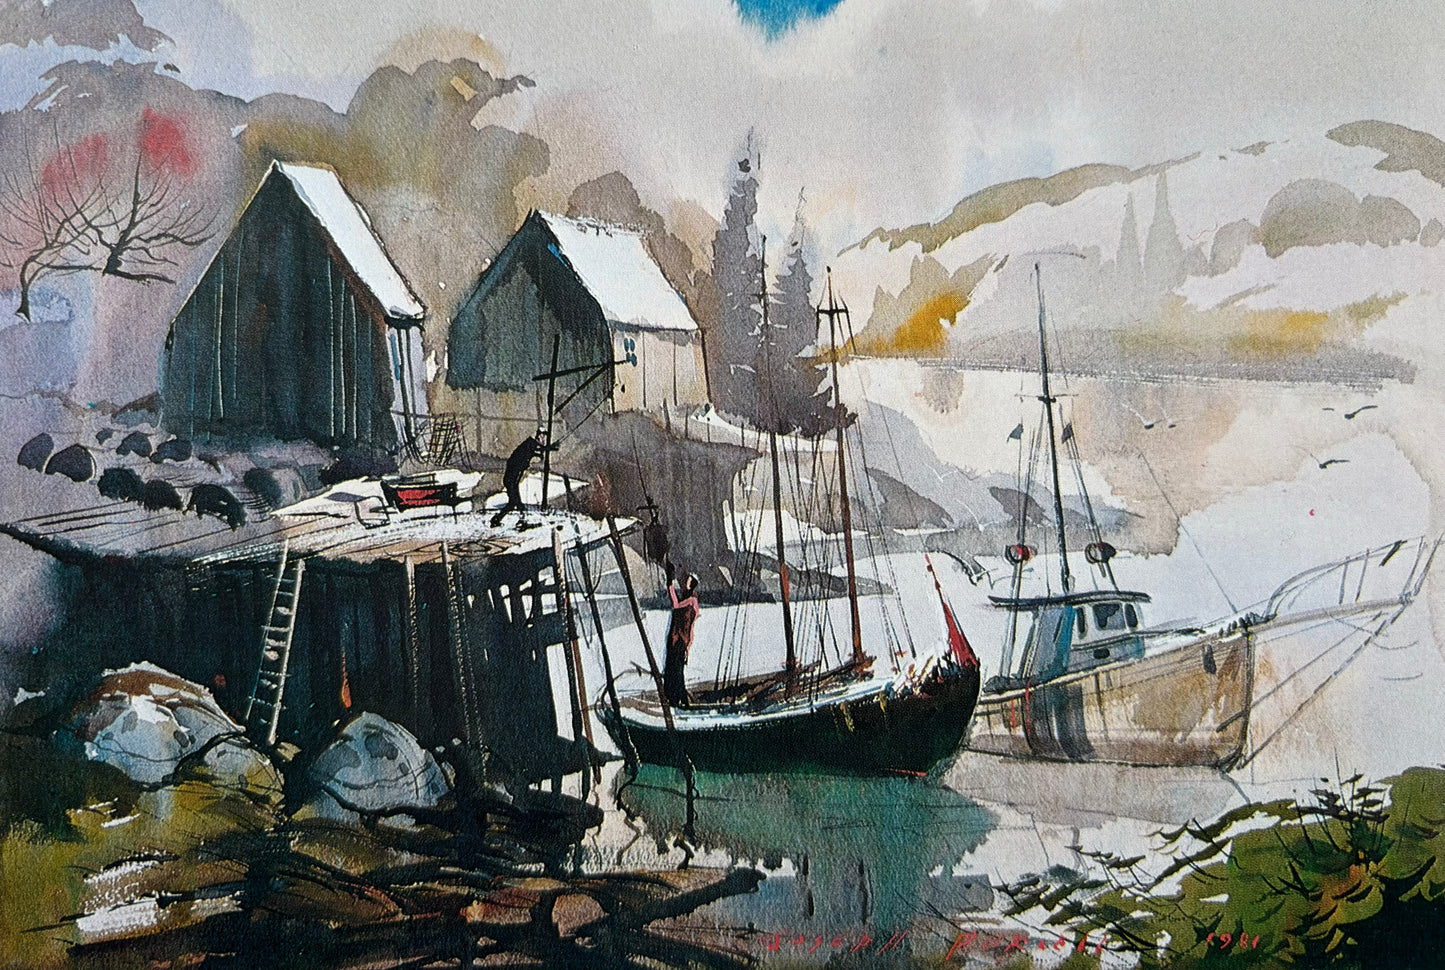 Nova Scotia Series Prints from watercolour paintings by Joseph Purcell